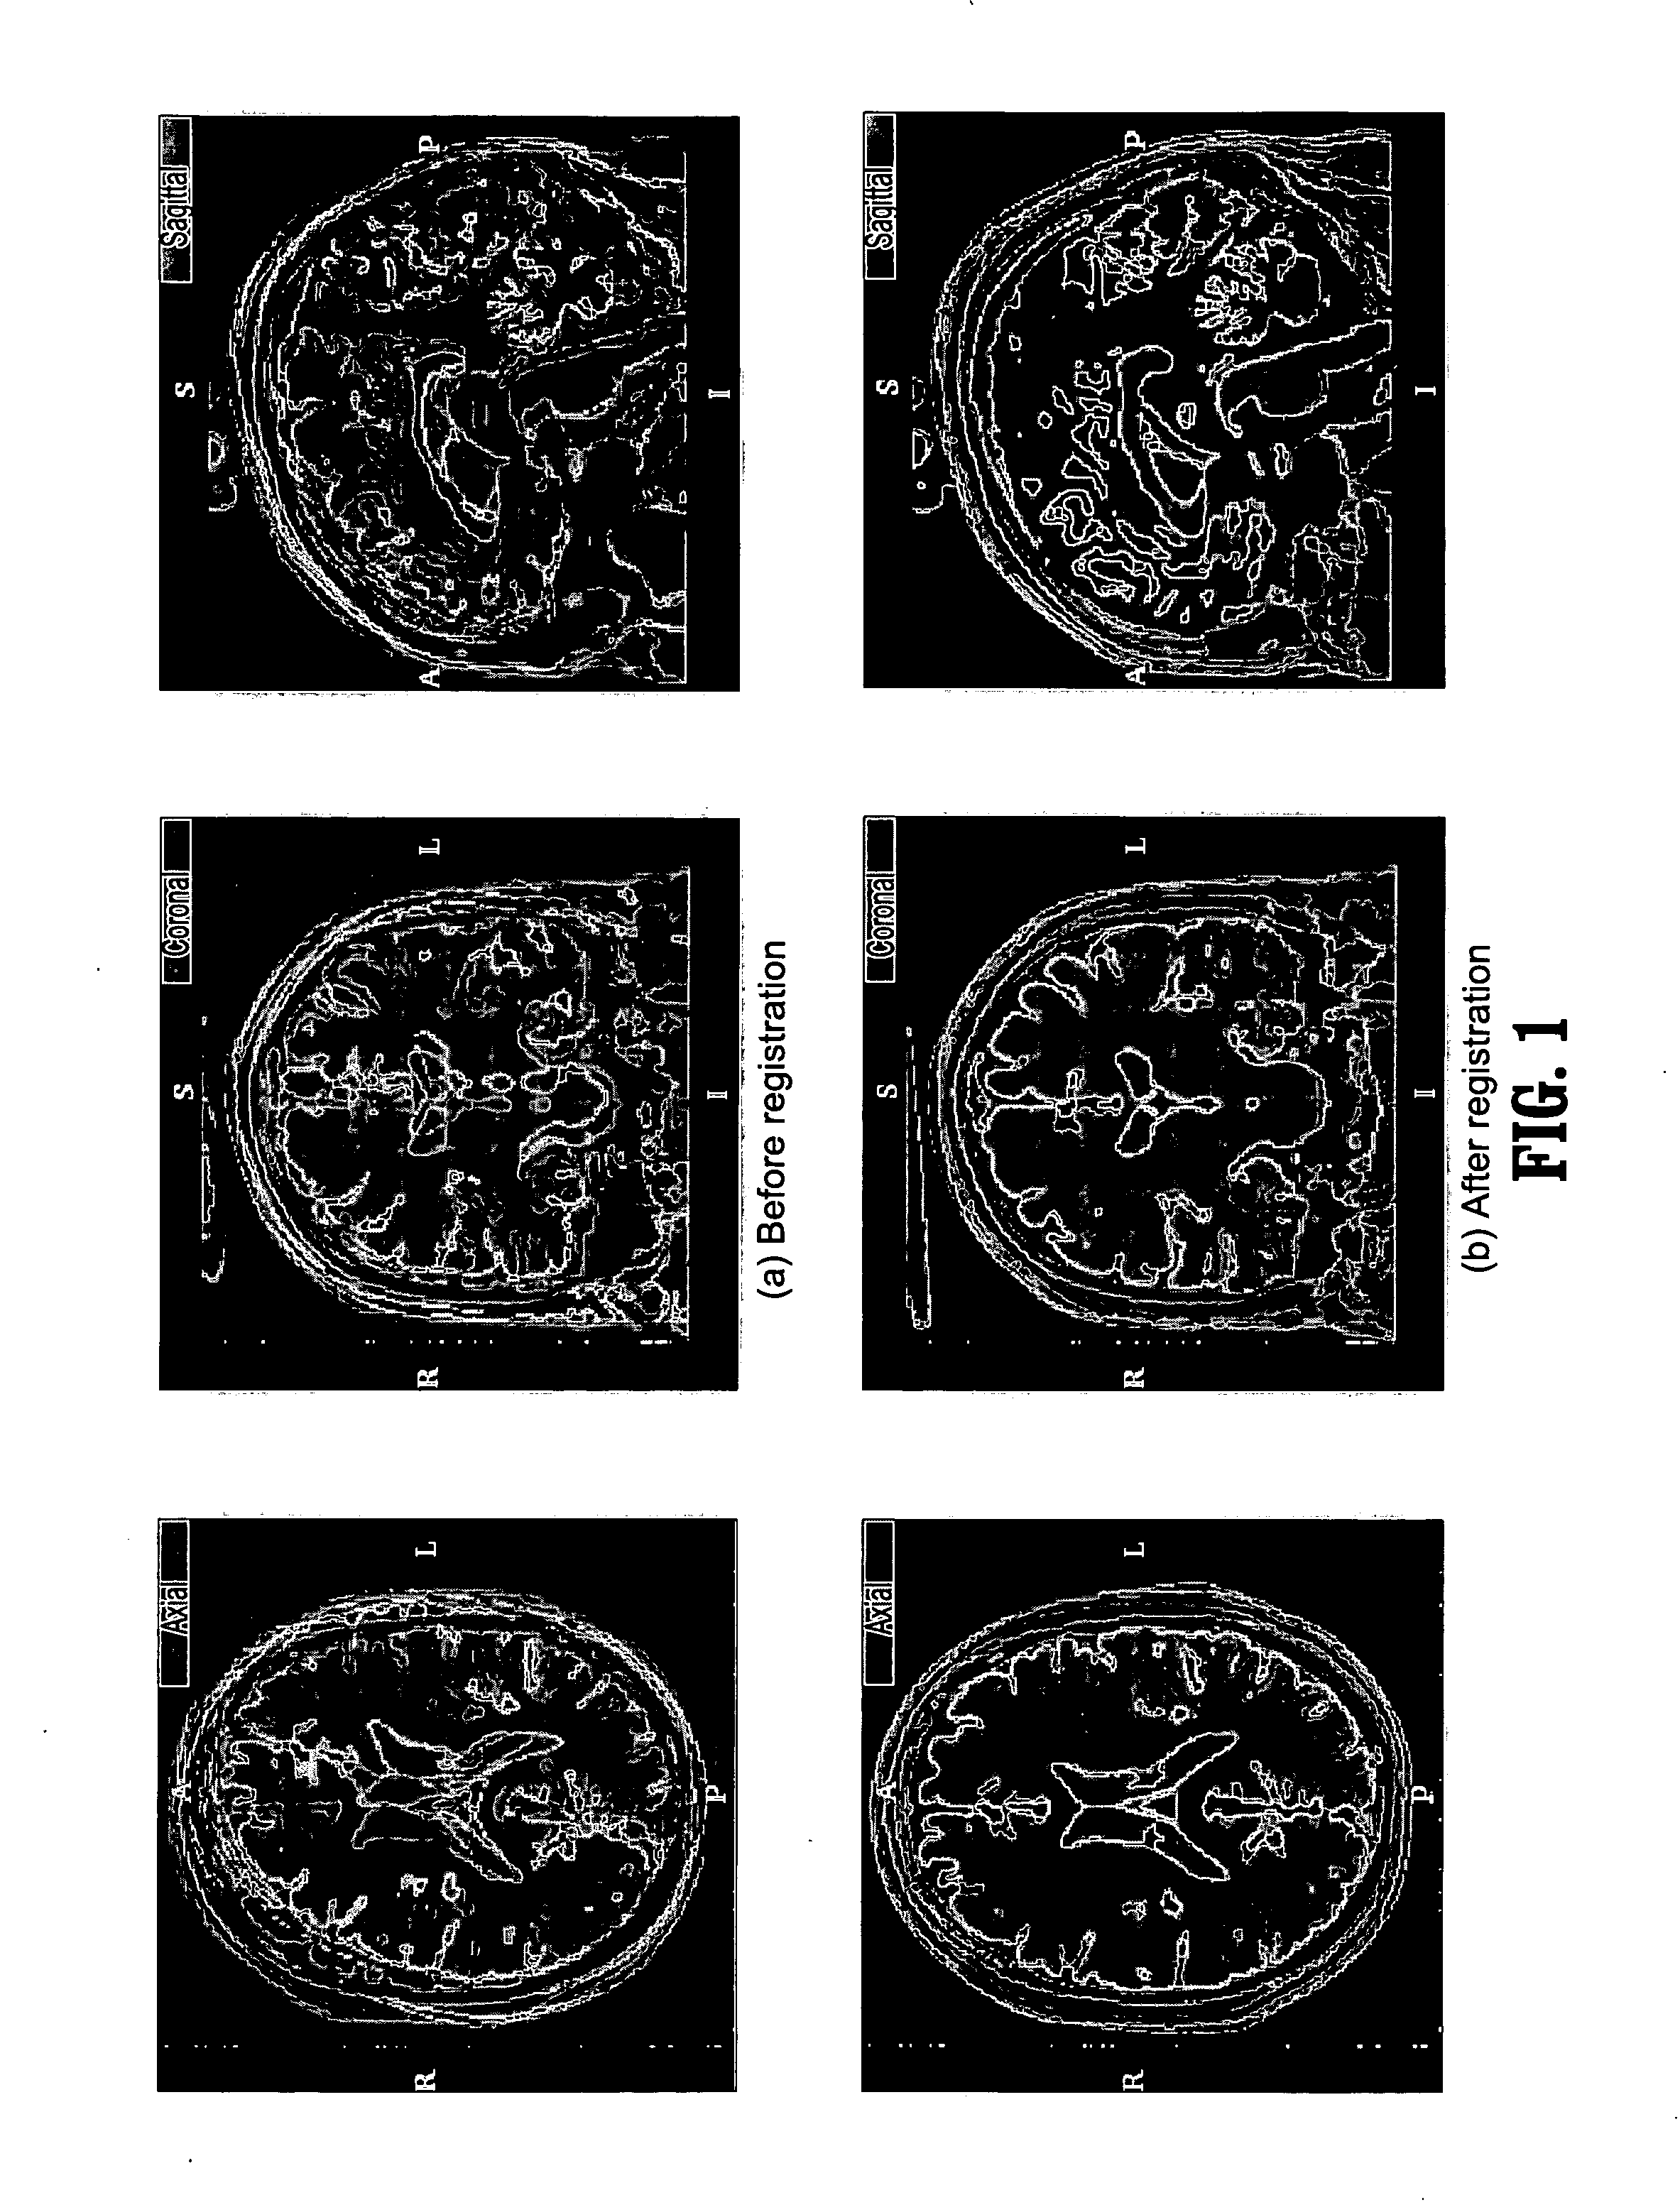 System and method for fast multimodal registration by least squares